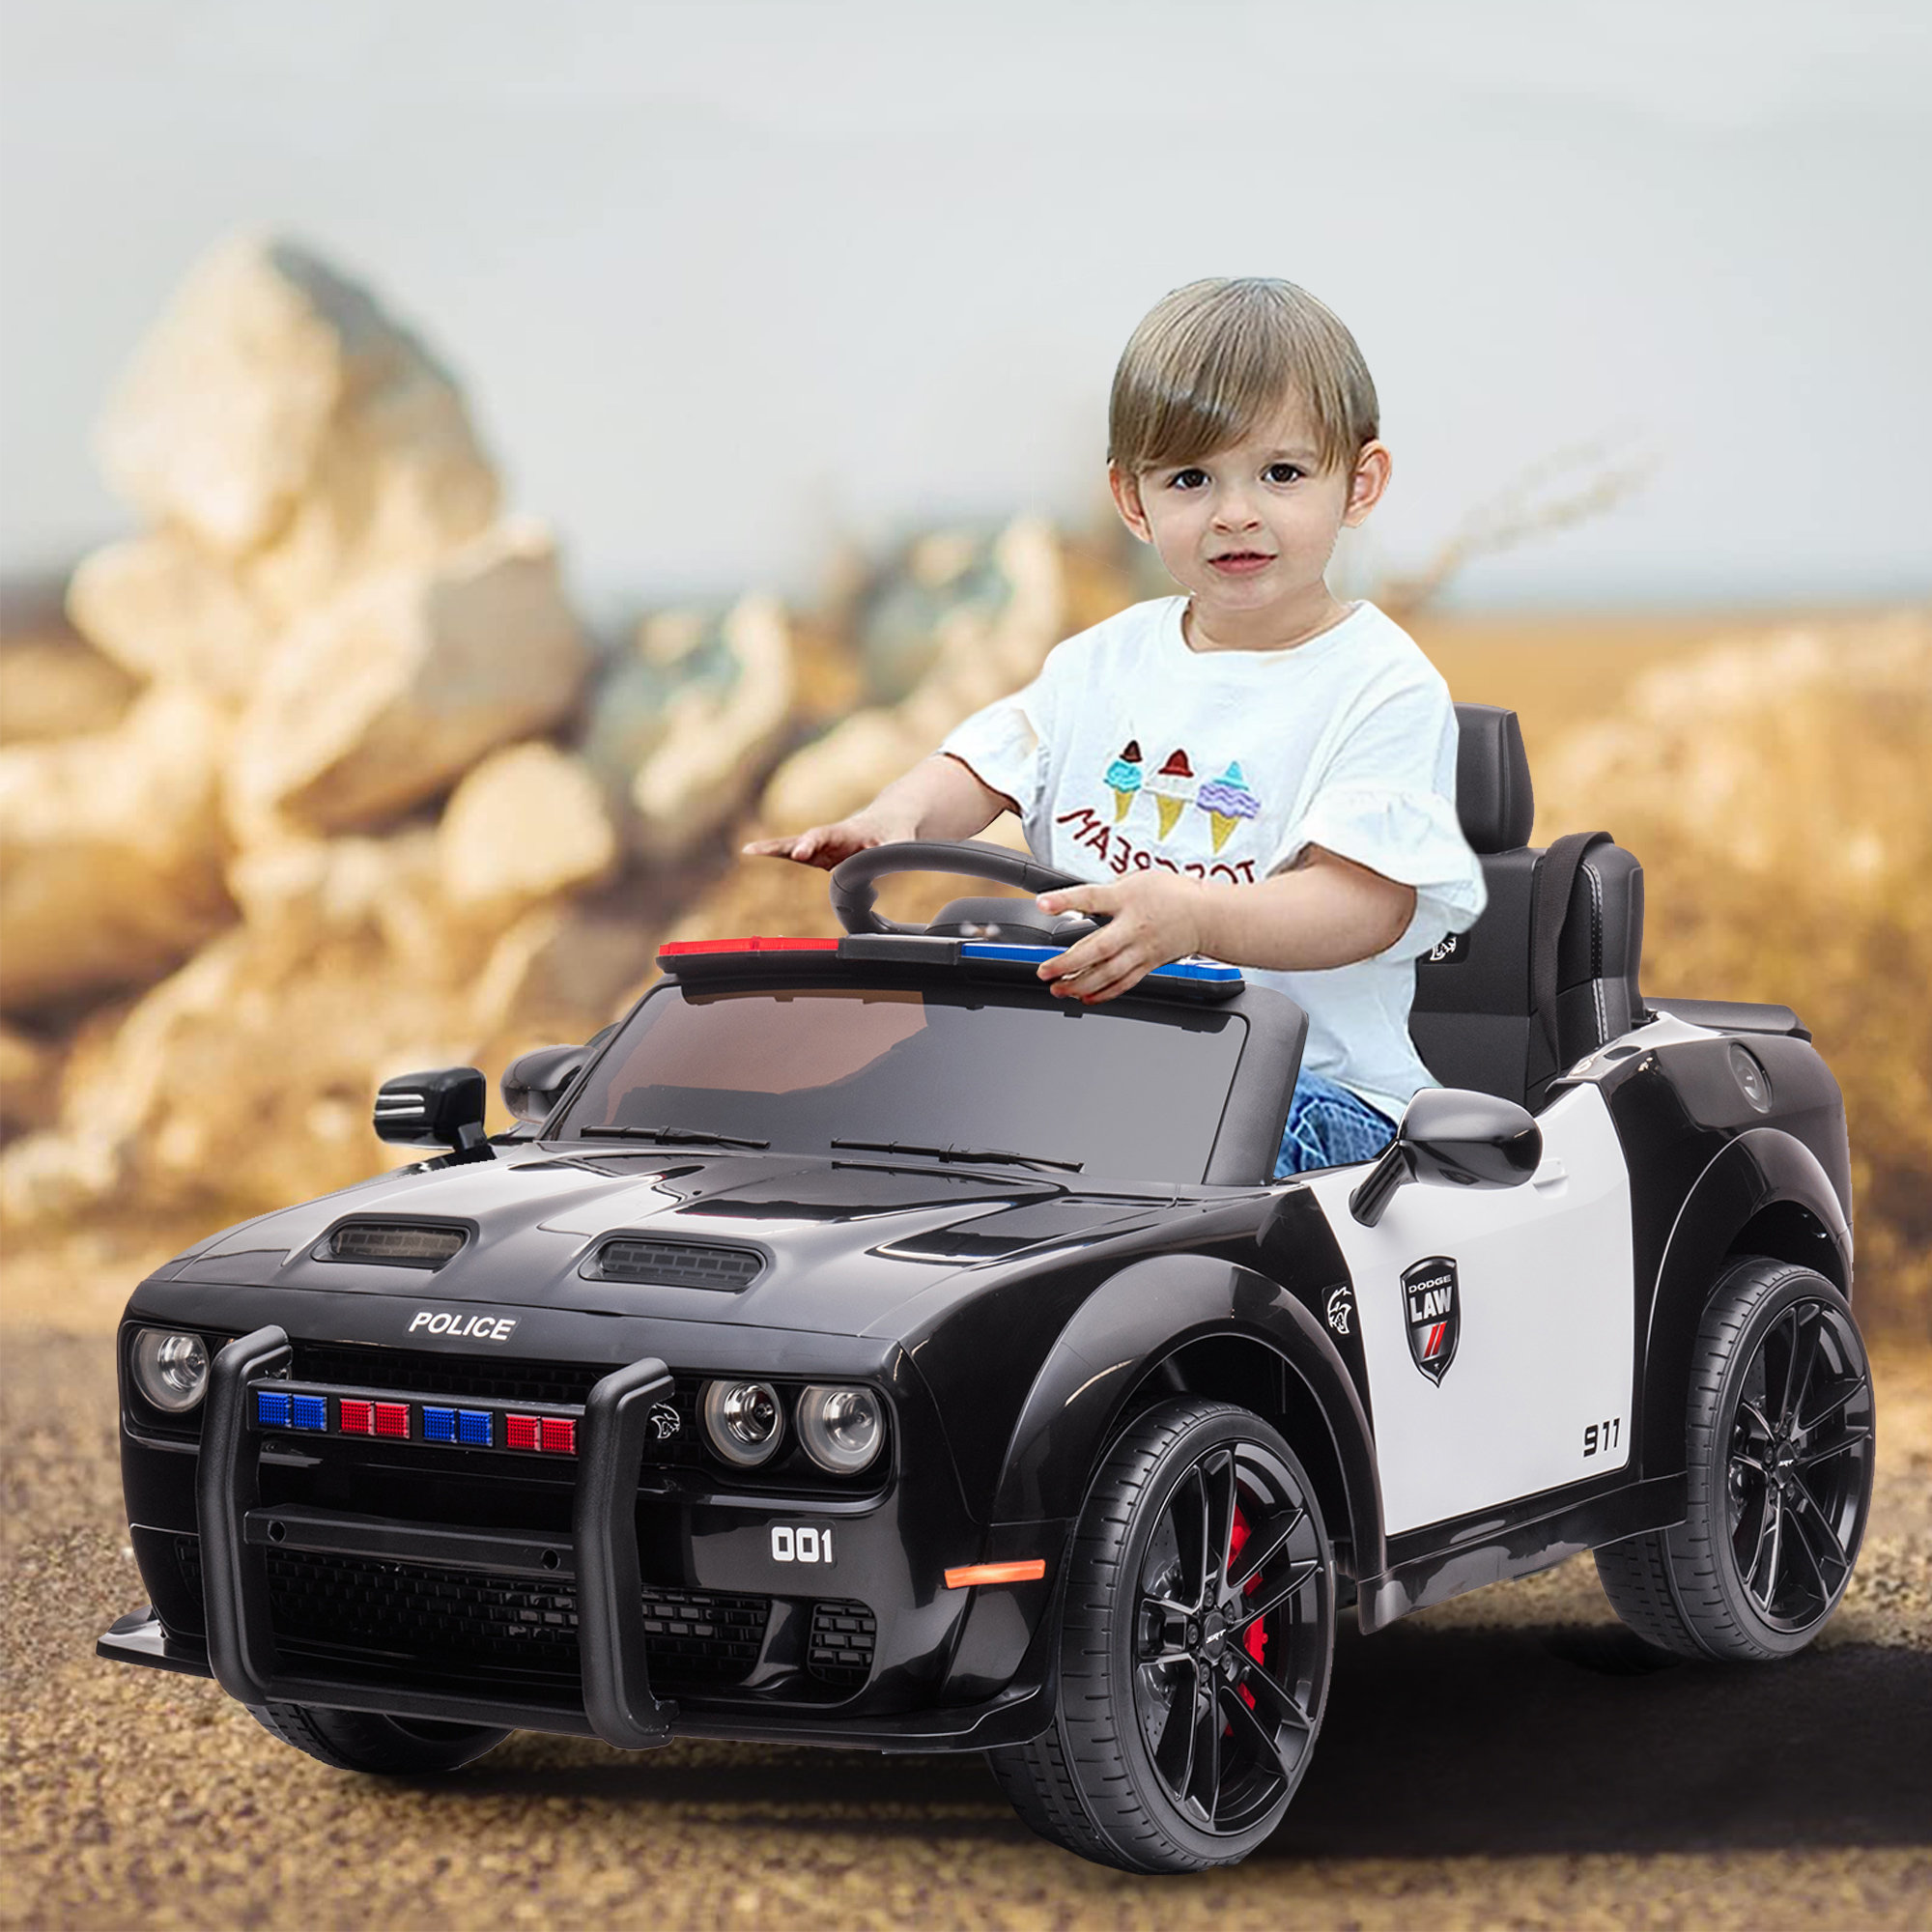 electric toy cars for kids